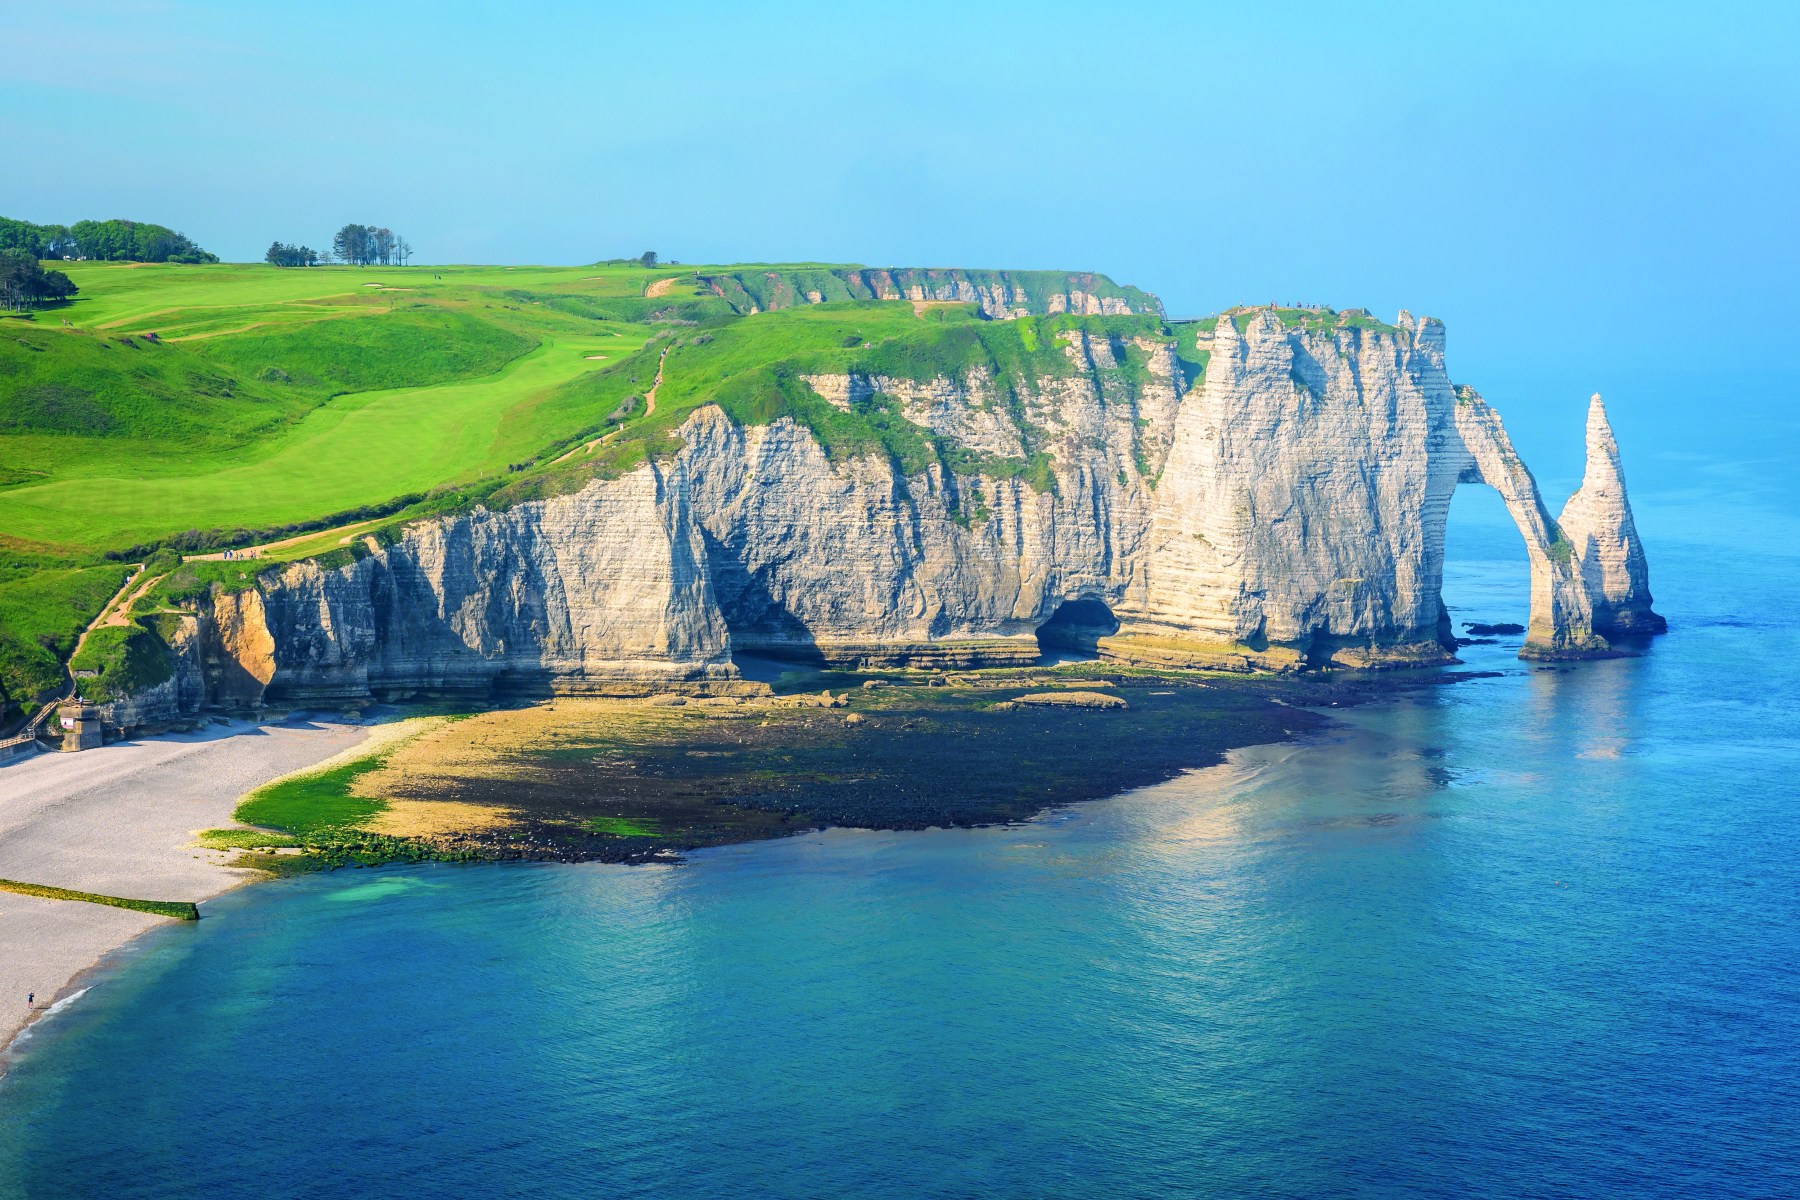 <strong>GOLF D'ÉTRETAT,</strong> France. Many golf courses are built atop cliffs, but not cliffs like these.<br><br>Waldek says: "At Golf d’Étretat in Normandy, the 10th hole is a stunner. The coastal town is known for its white chalk cliffs facing the English Channel, and the hole plays right up to them. The course suffered during World War II when its fairways and greens were filled with landmines."<br>